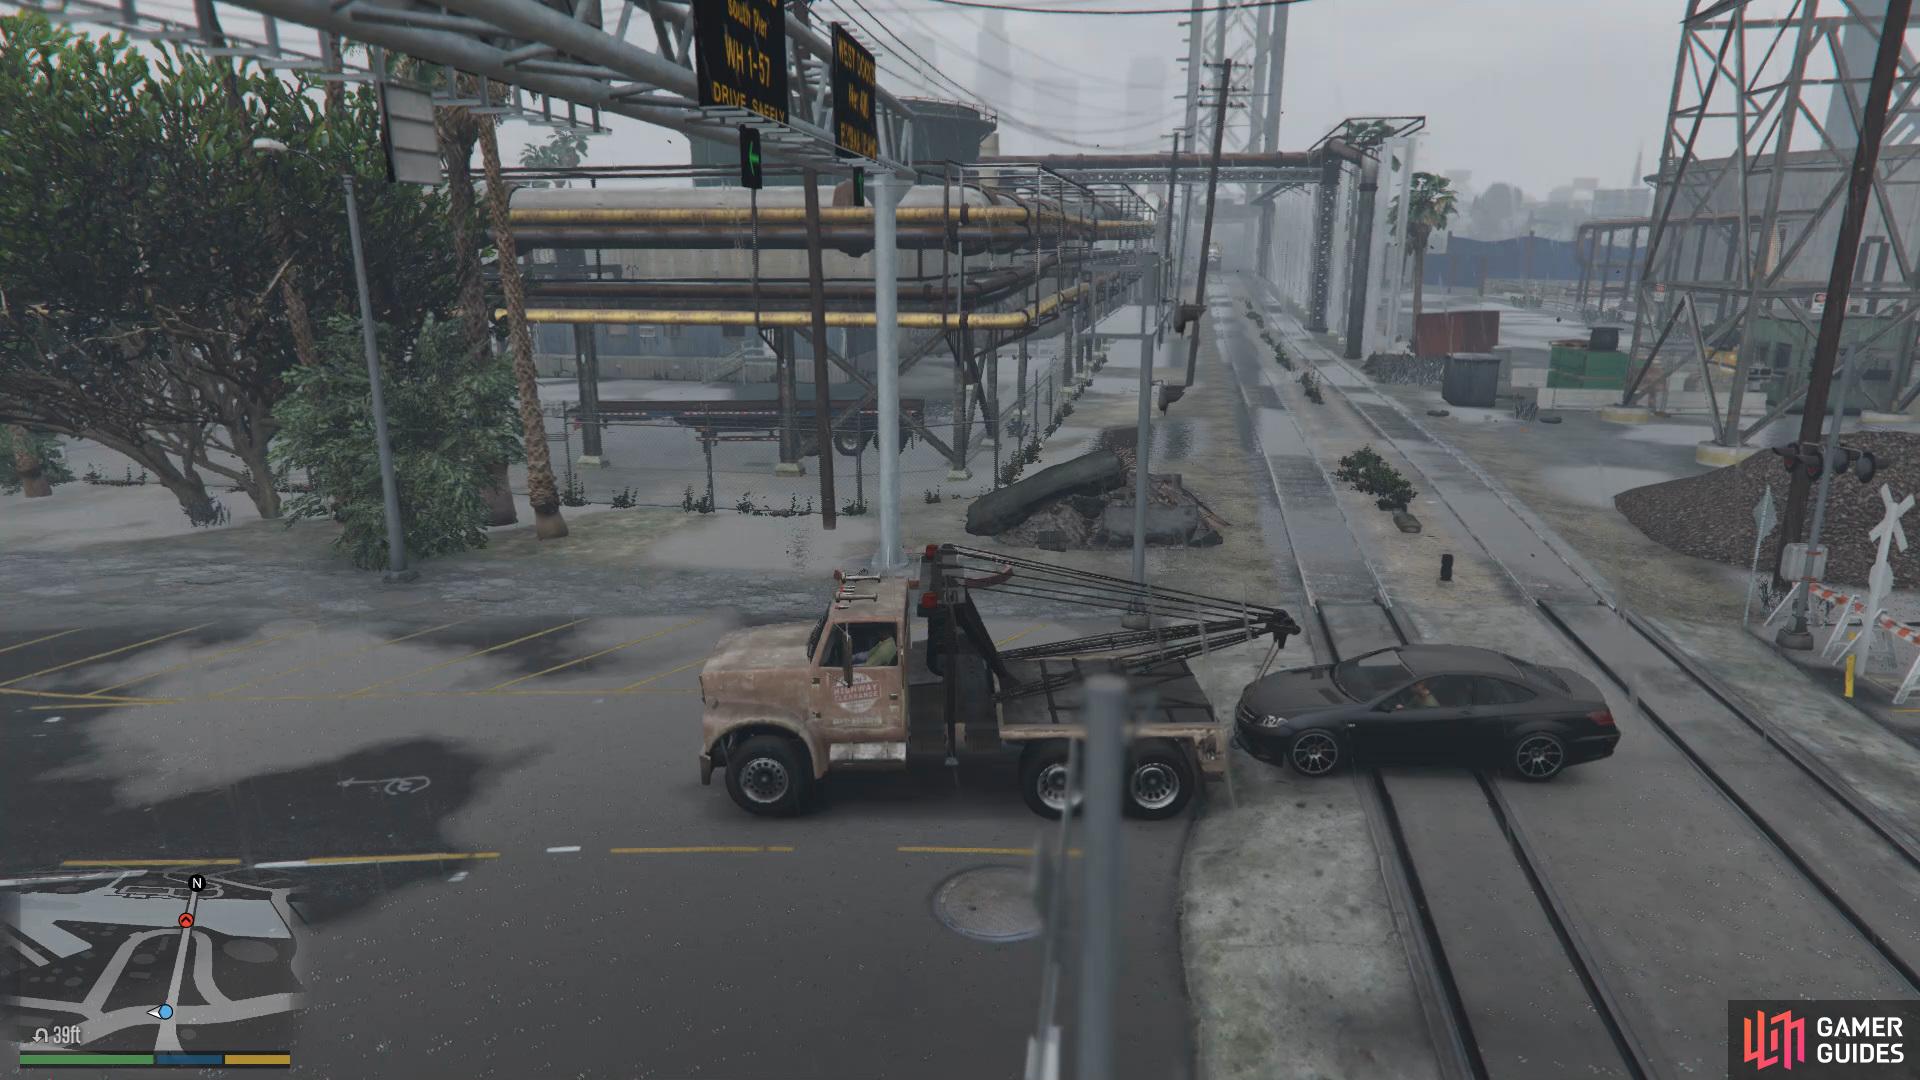 Quickly hook up the car and take off the tracks before the train passes